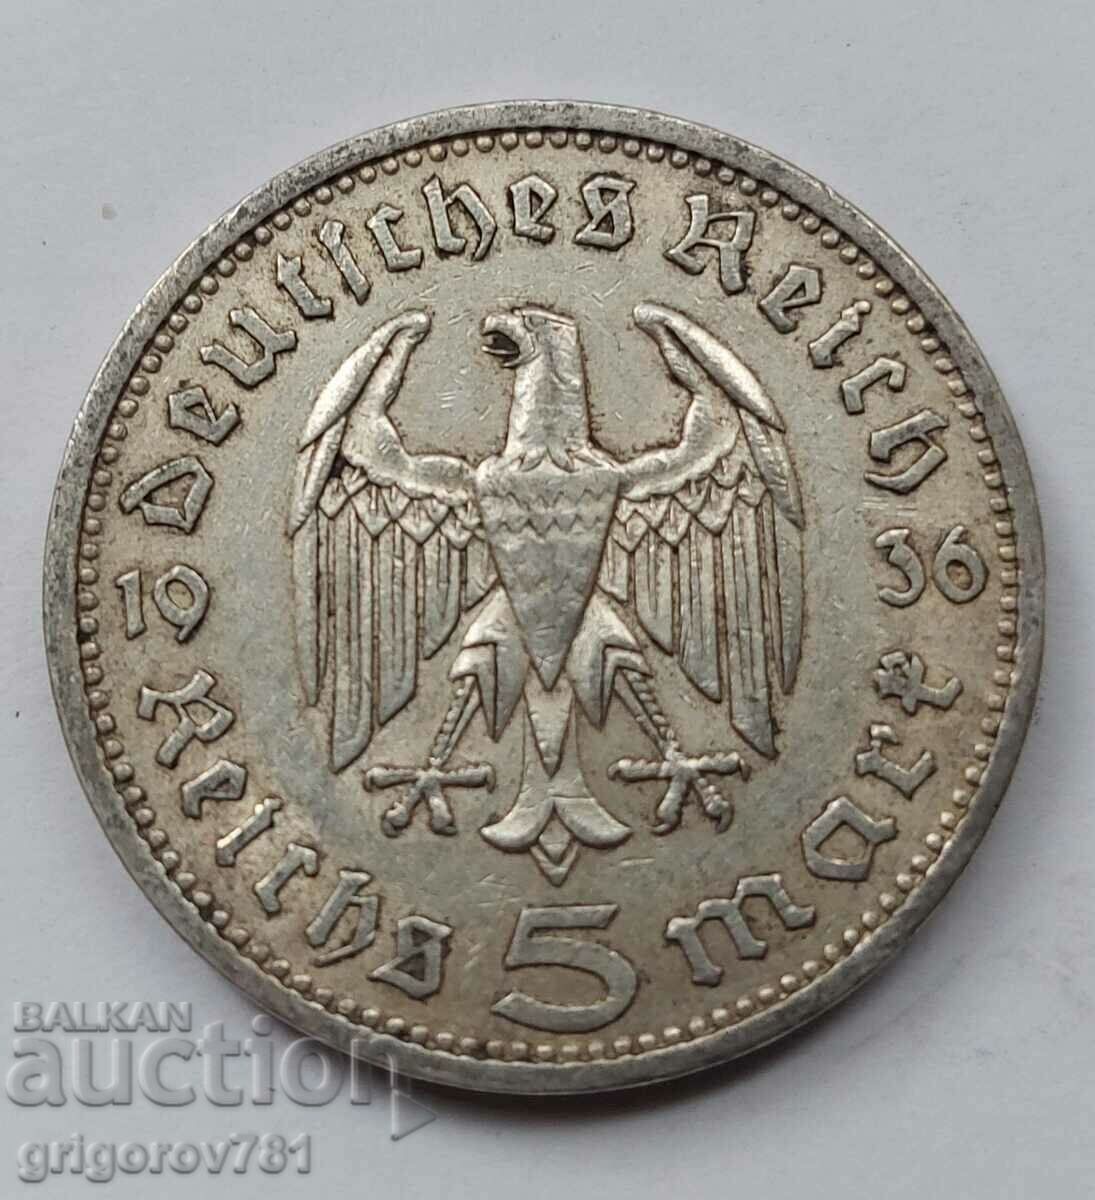 5 Mark Silver Germany 1936 A III Reich Silver Coin #51